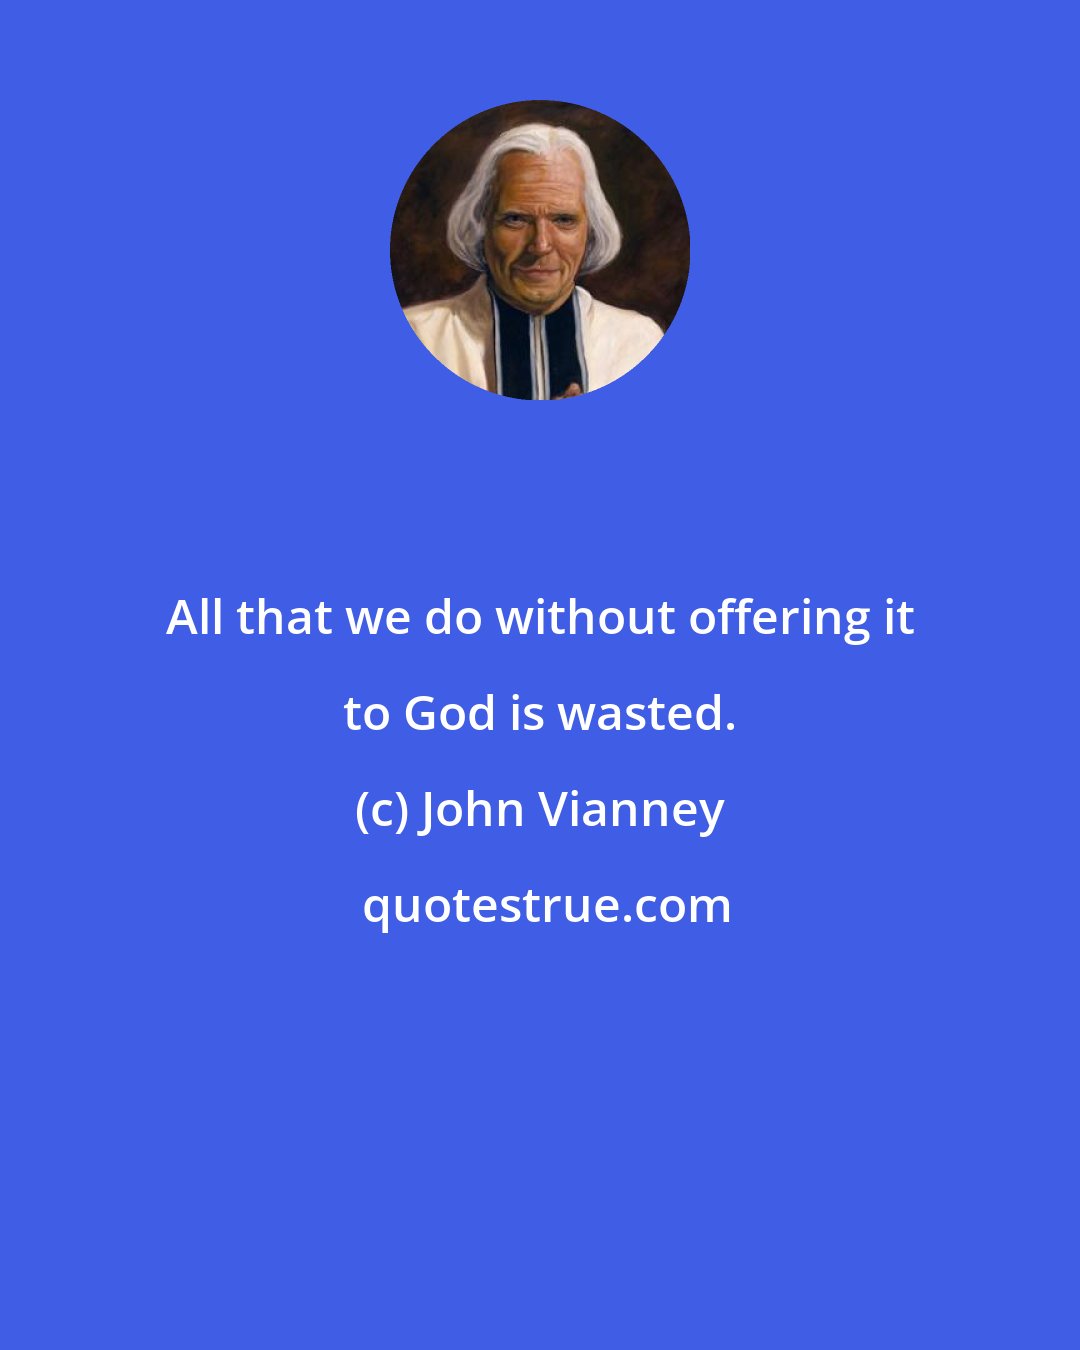 John Vianney: All that we do without offering it to God is wasted.